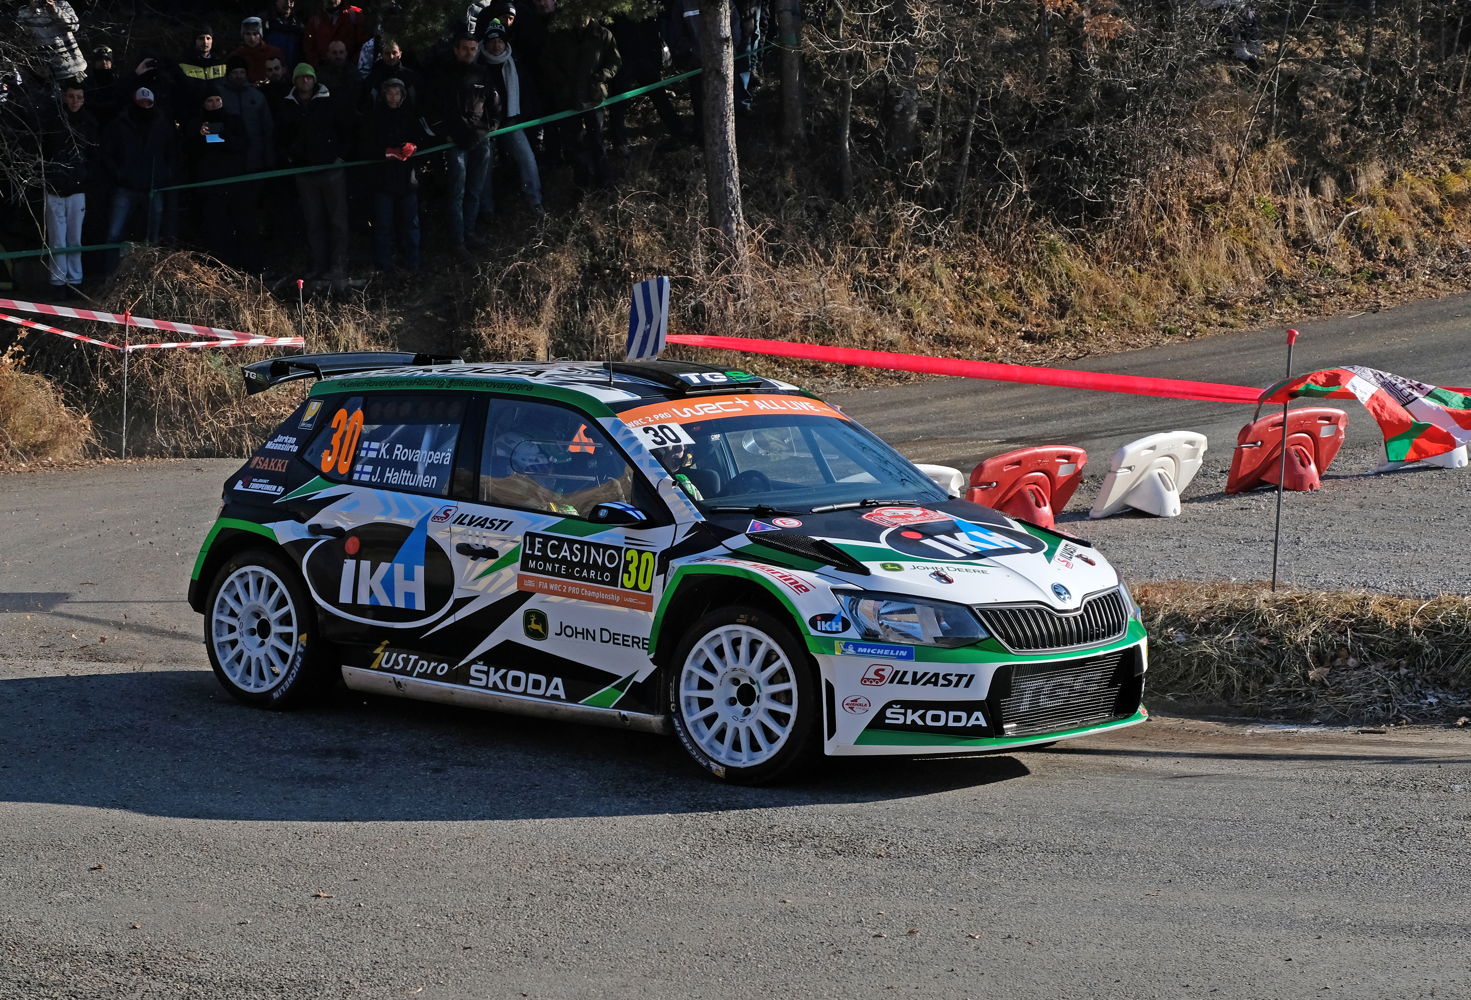 ŠKODA Motorsport works crew Kalle Rovanperä/Jonne Halttunen (ŠKODA FABIA R5) want to conquer the lead in the WRC 2 Pro category at the upcoming French round of the FIA World Rally Championship.